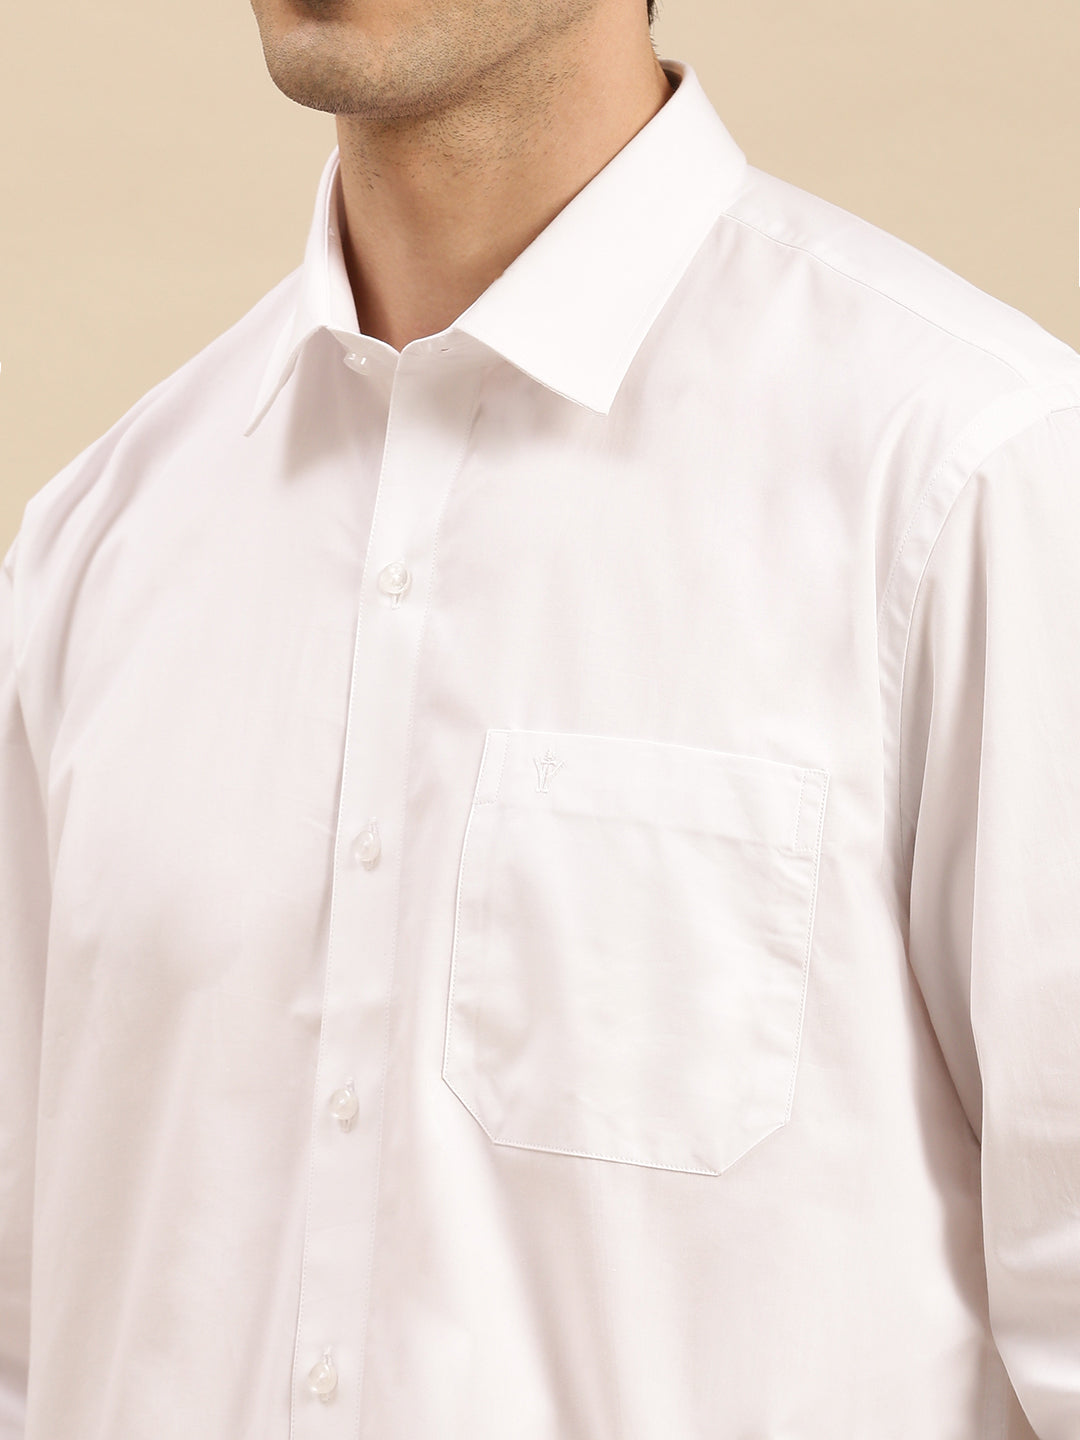 Mens Cotton White Shirt Full Sleeves 100% Cotton -Zoom view